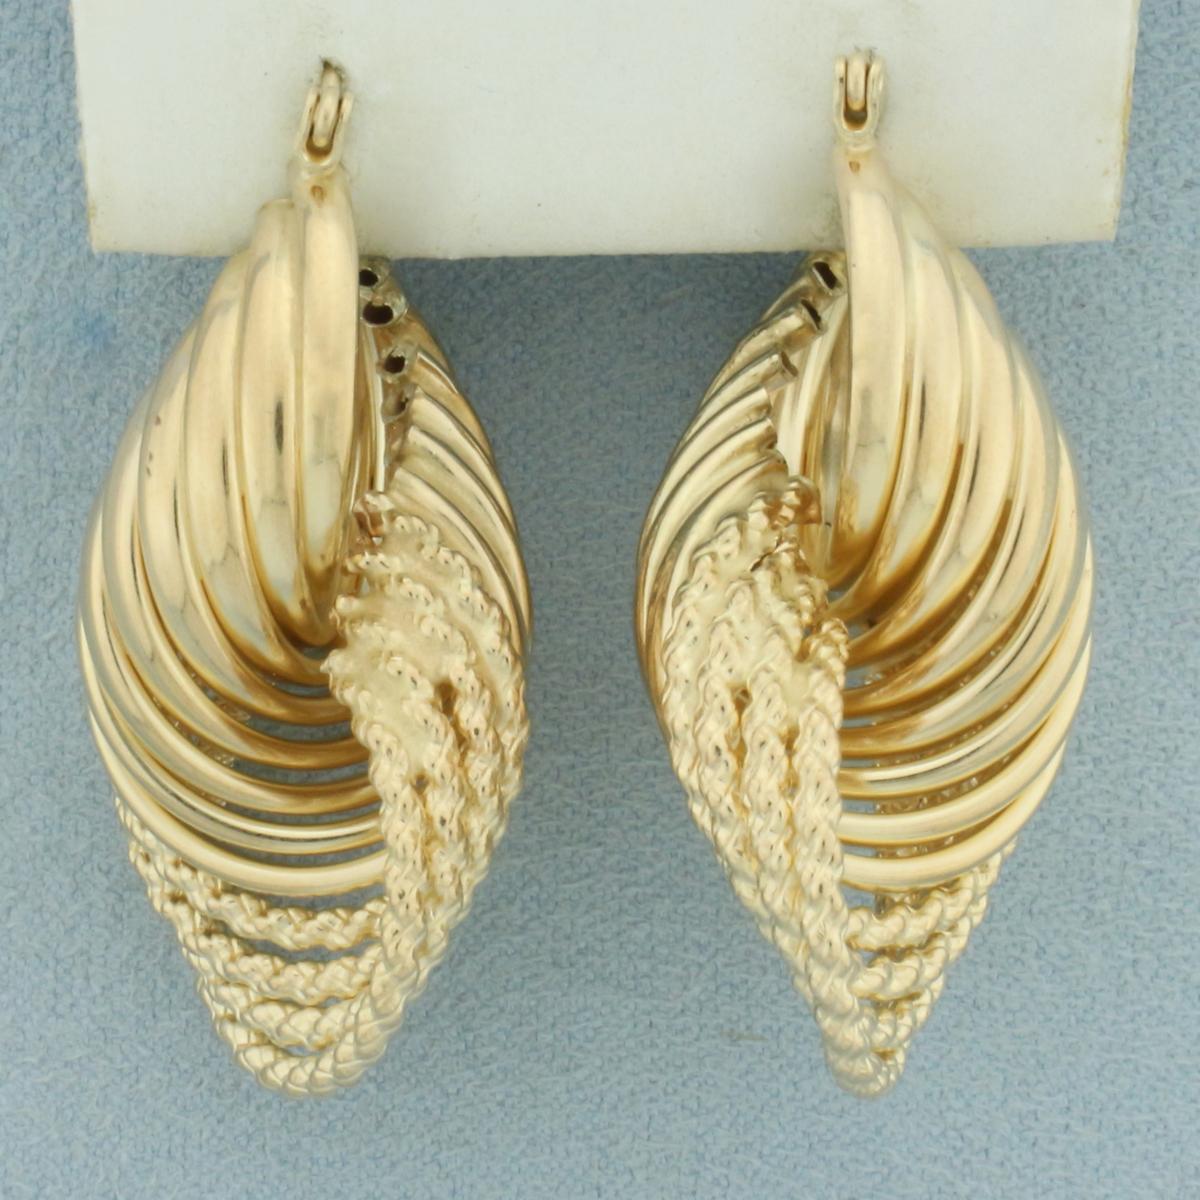 Unique Twisting Rope Design Earrings In 14k Yellow Gold